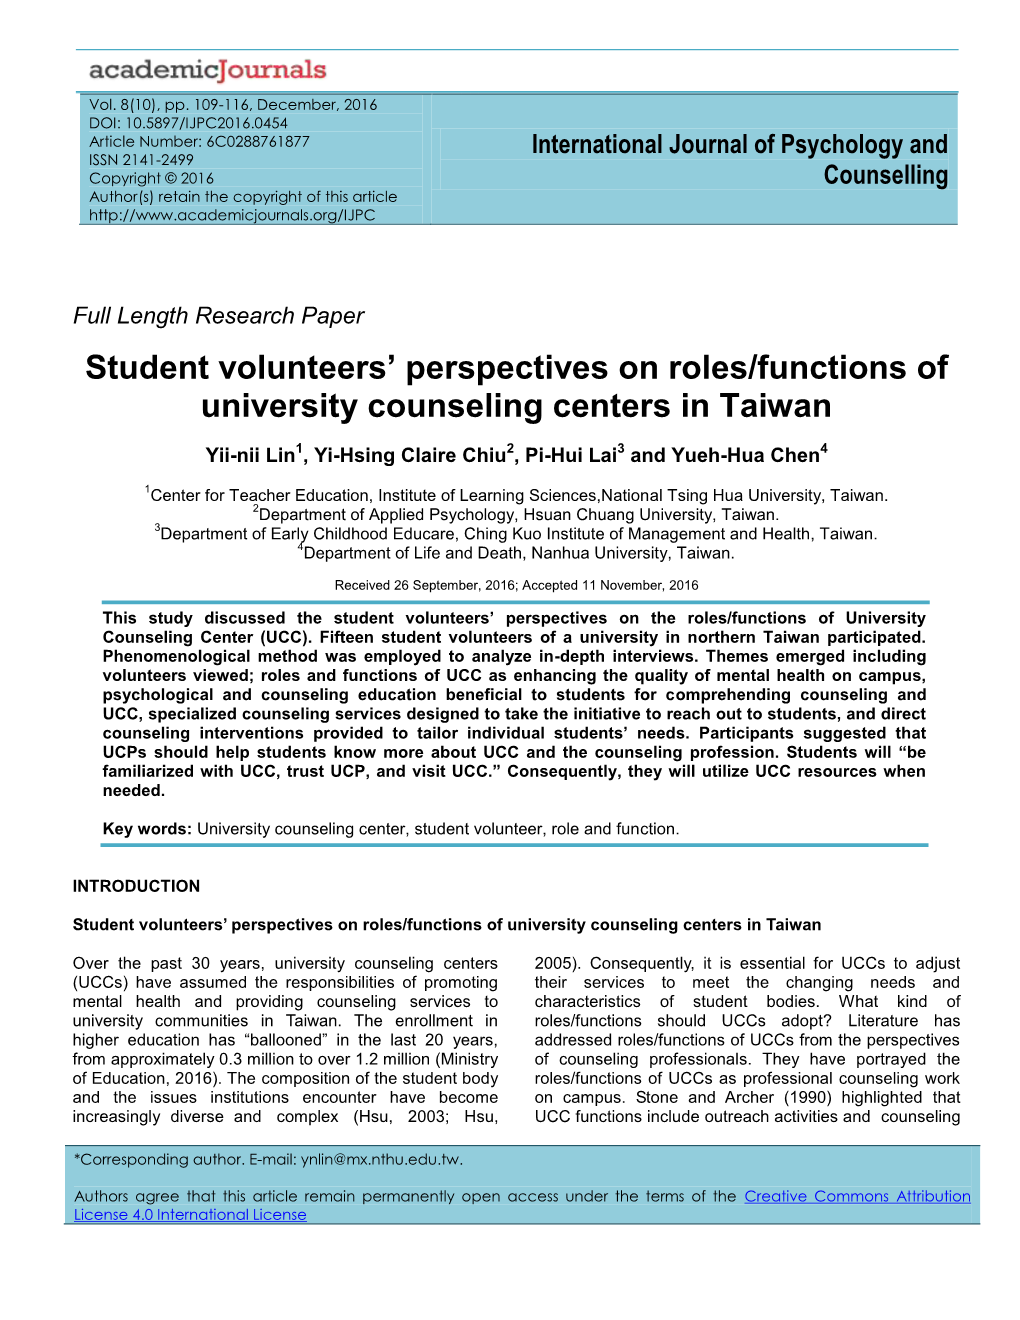 Student Volunteers' Perspectives on Roles/Functions of University